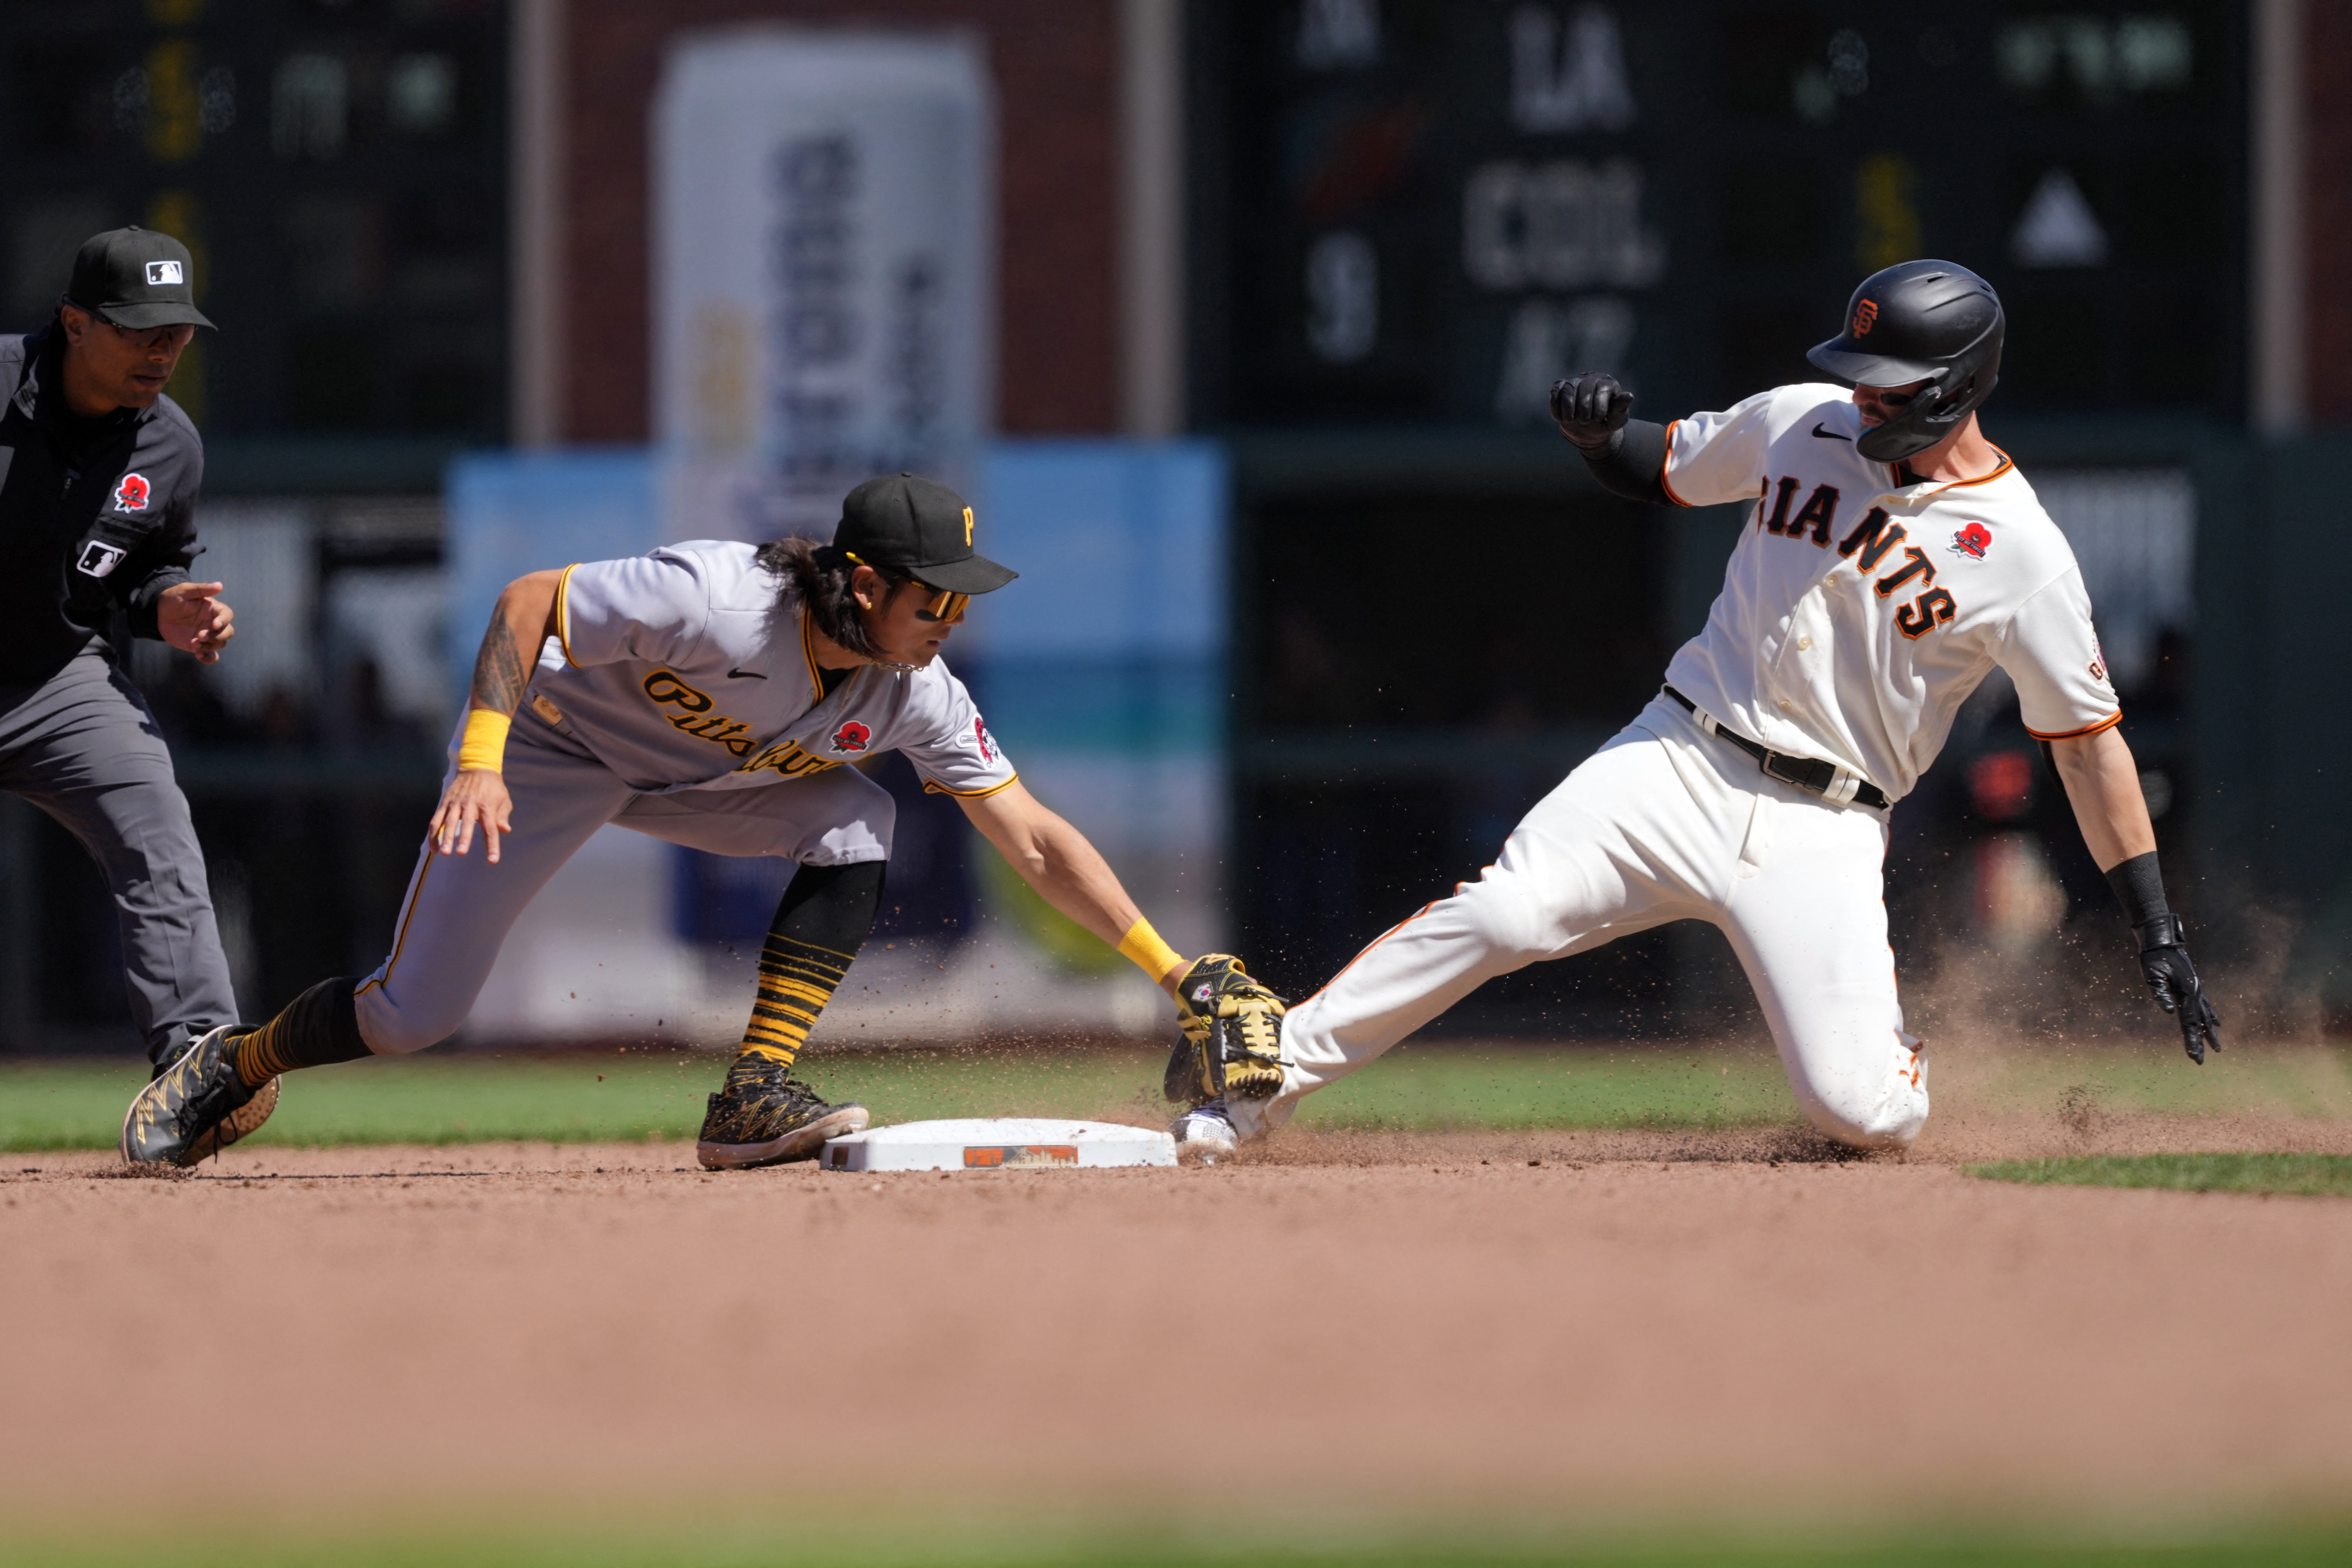 Giants explode in 7th inning, blast Pirates